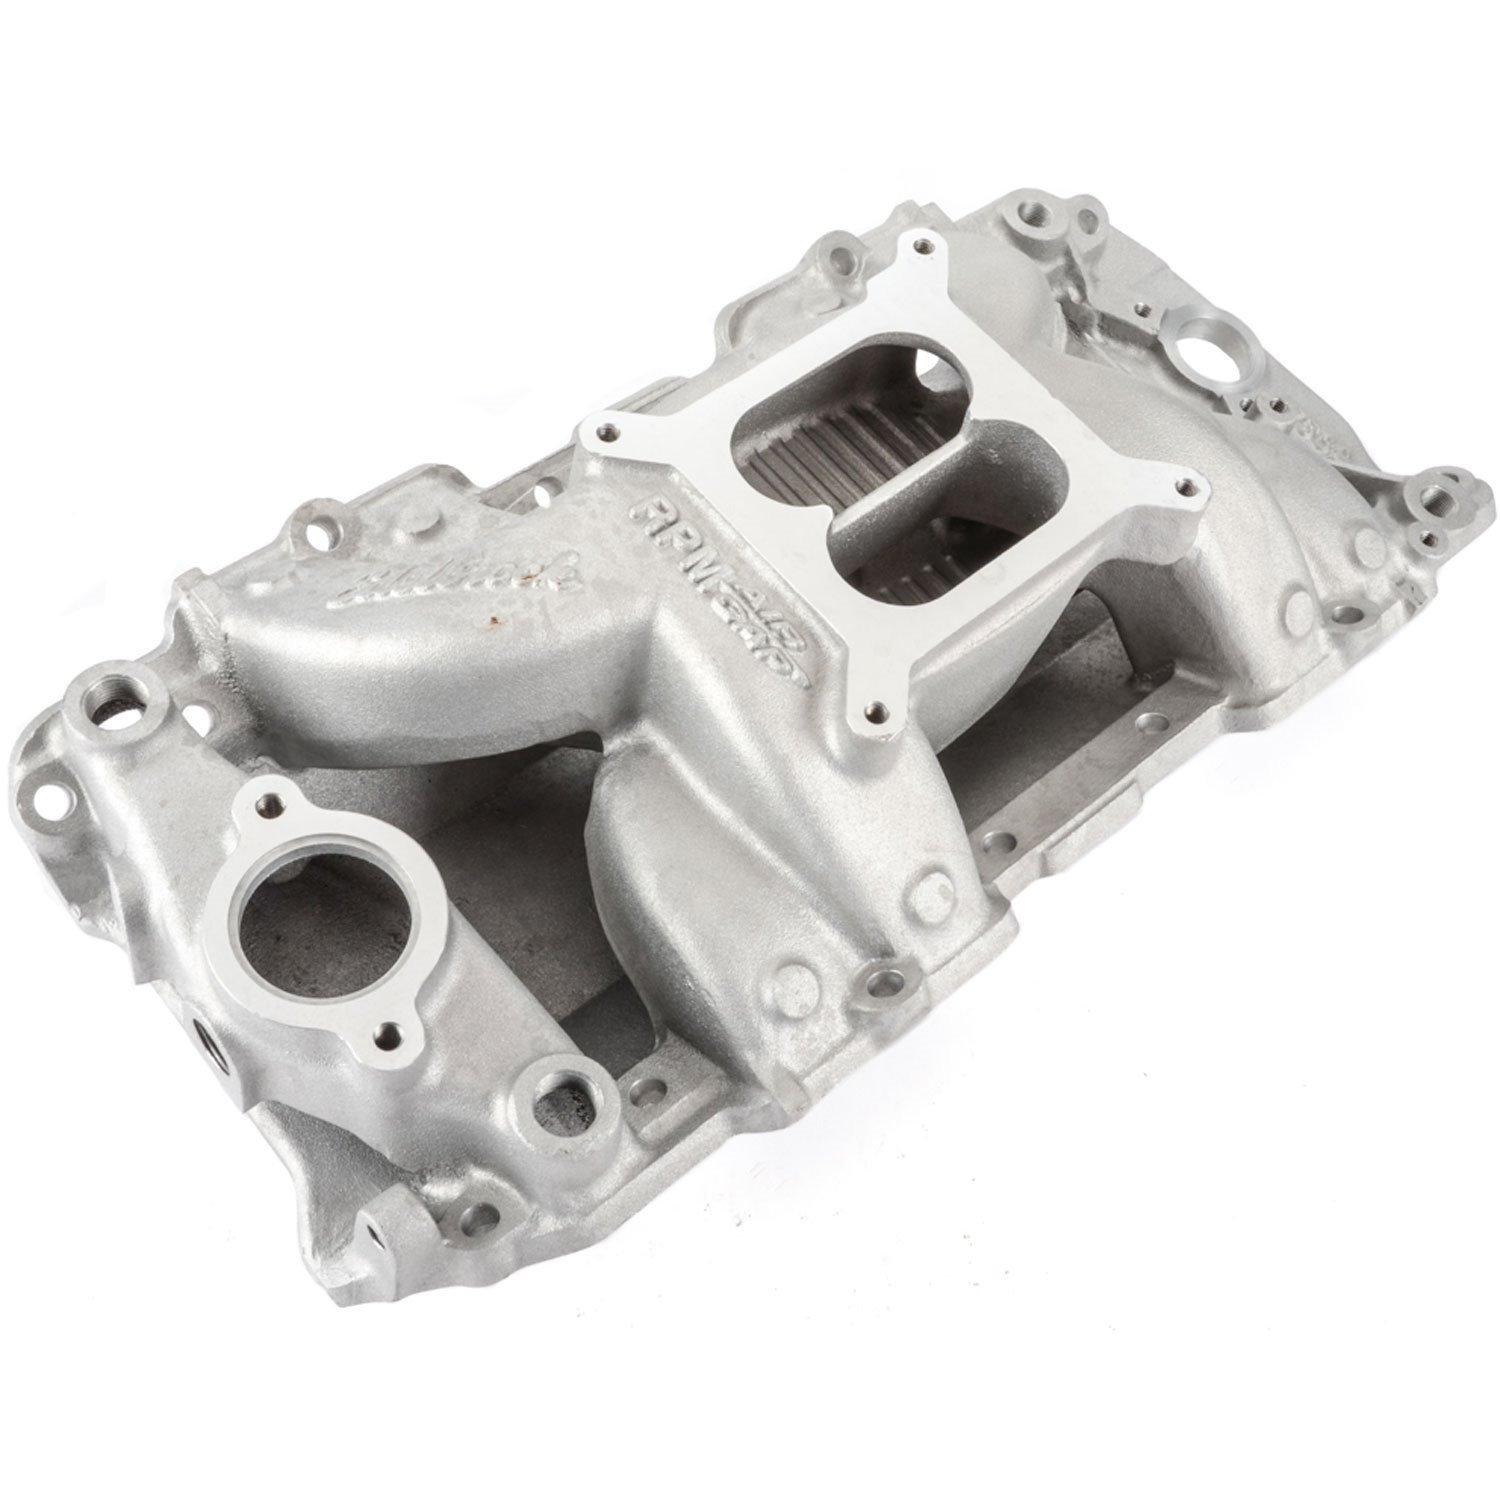 7562 RPM Air-Gap 2-R Intake Manifold with Rectangular Port Cylinder Heads for Big Block Chevy 396-502